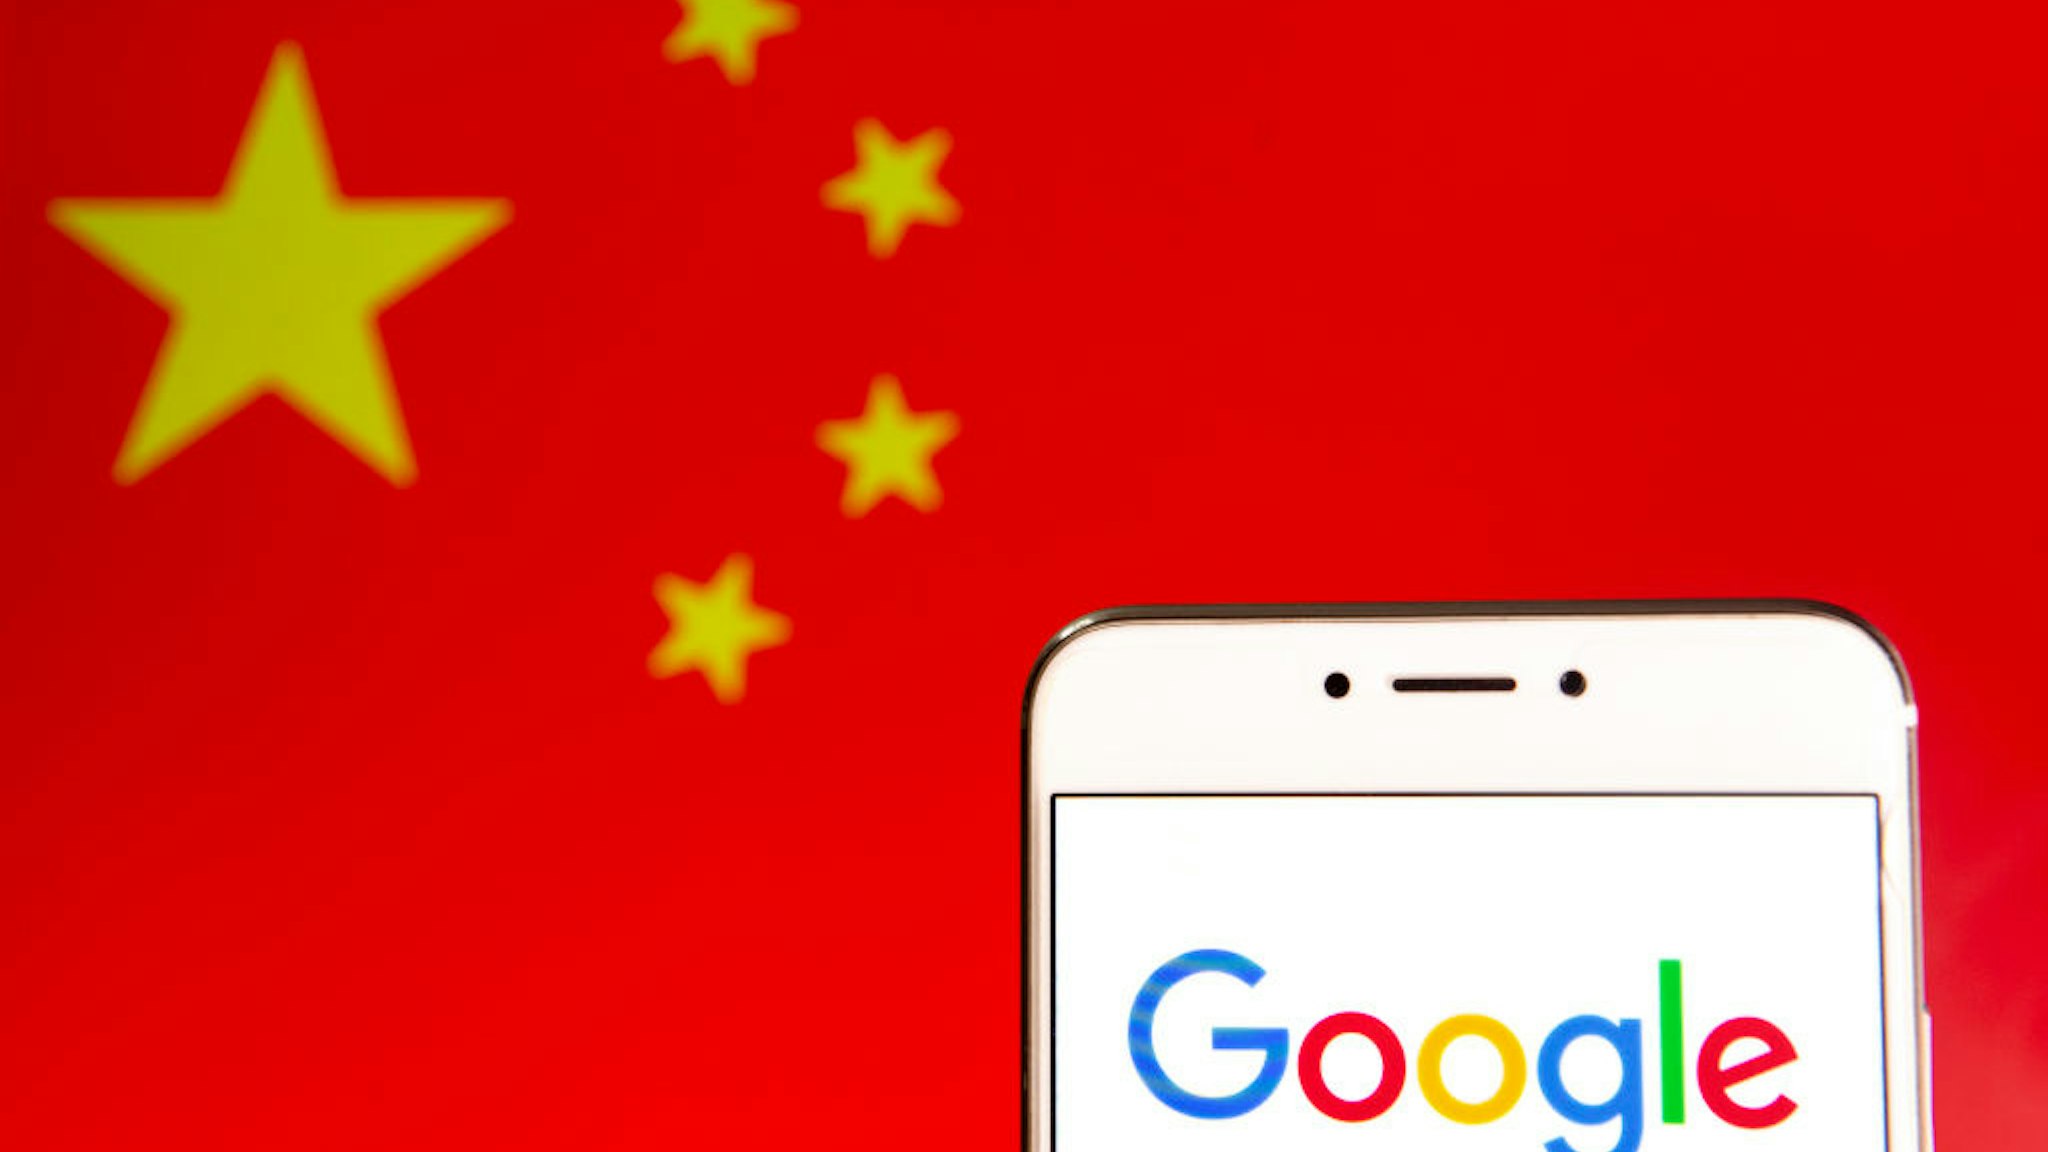 In this photo illustration a logo of the American multinational technology company and search engine Google is seen on an Android mobile device with People's Republic of China flag in the background.